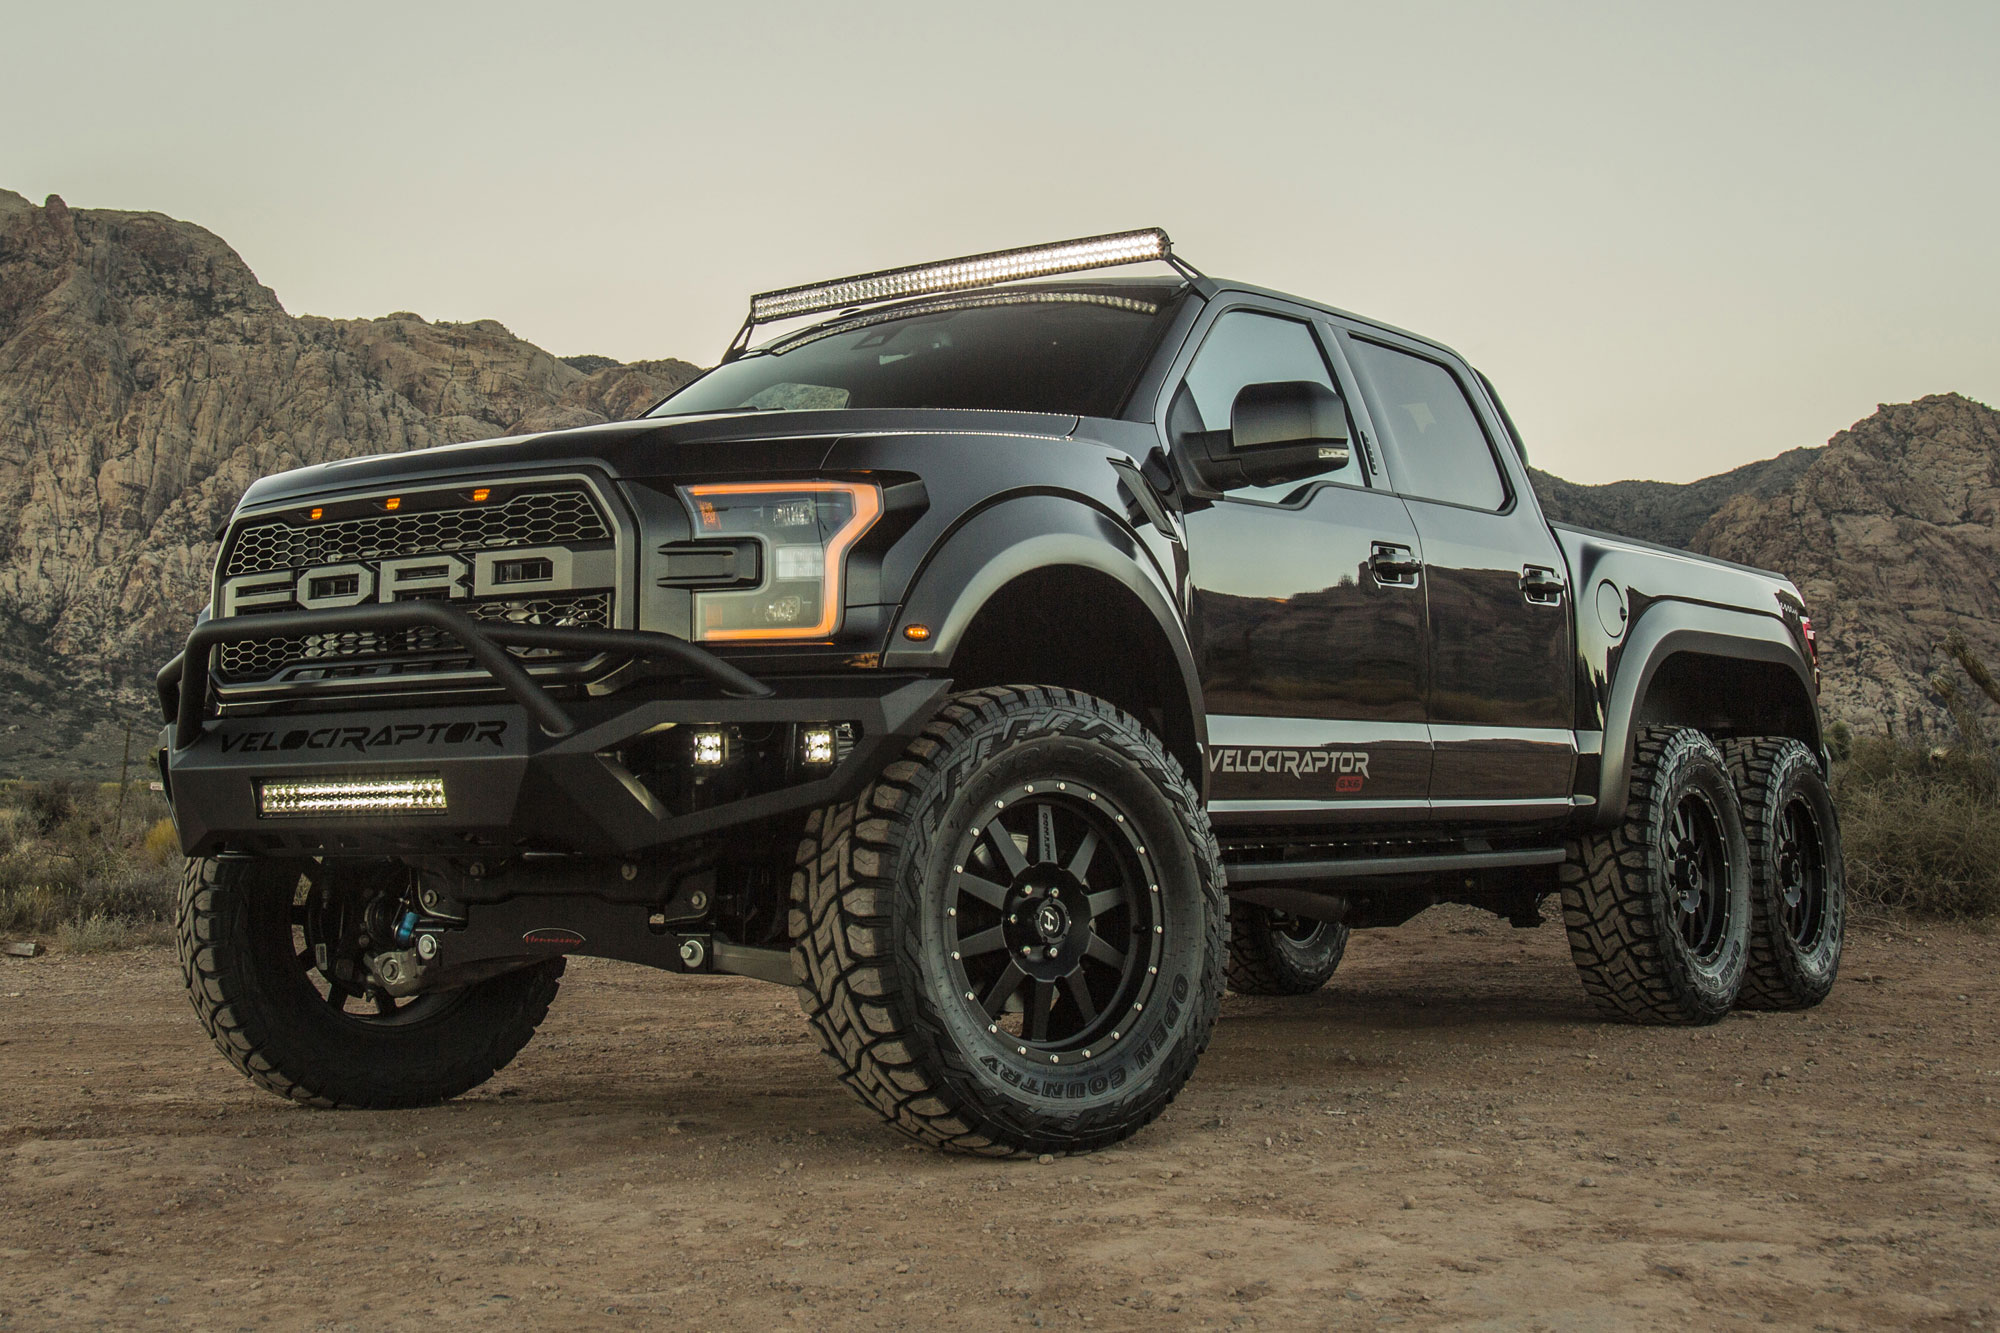 6x6 Ford Truck Is 'Aggression on Wheels'